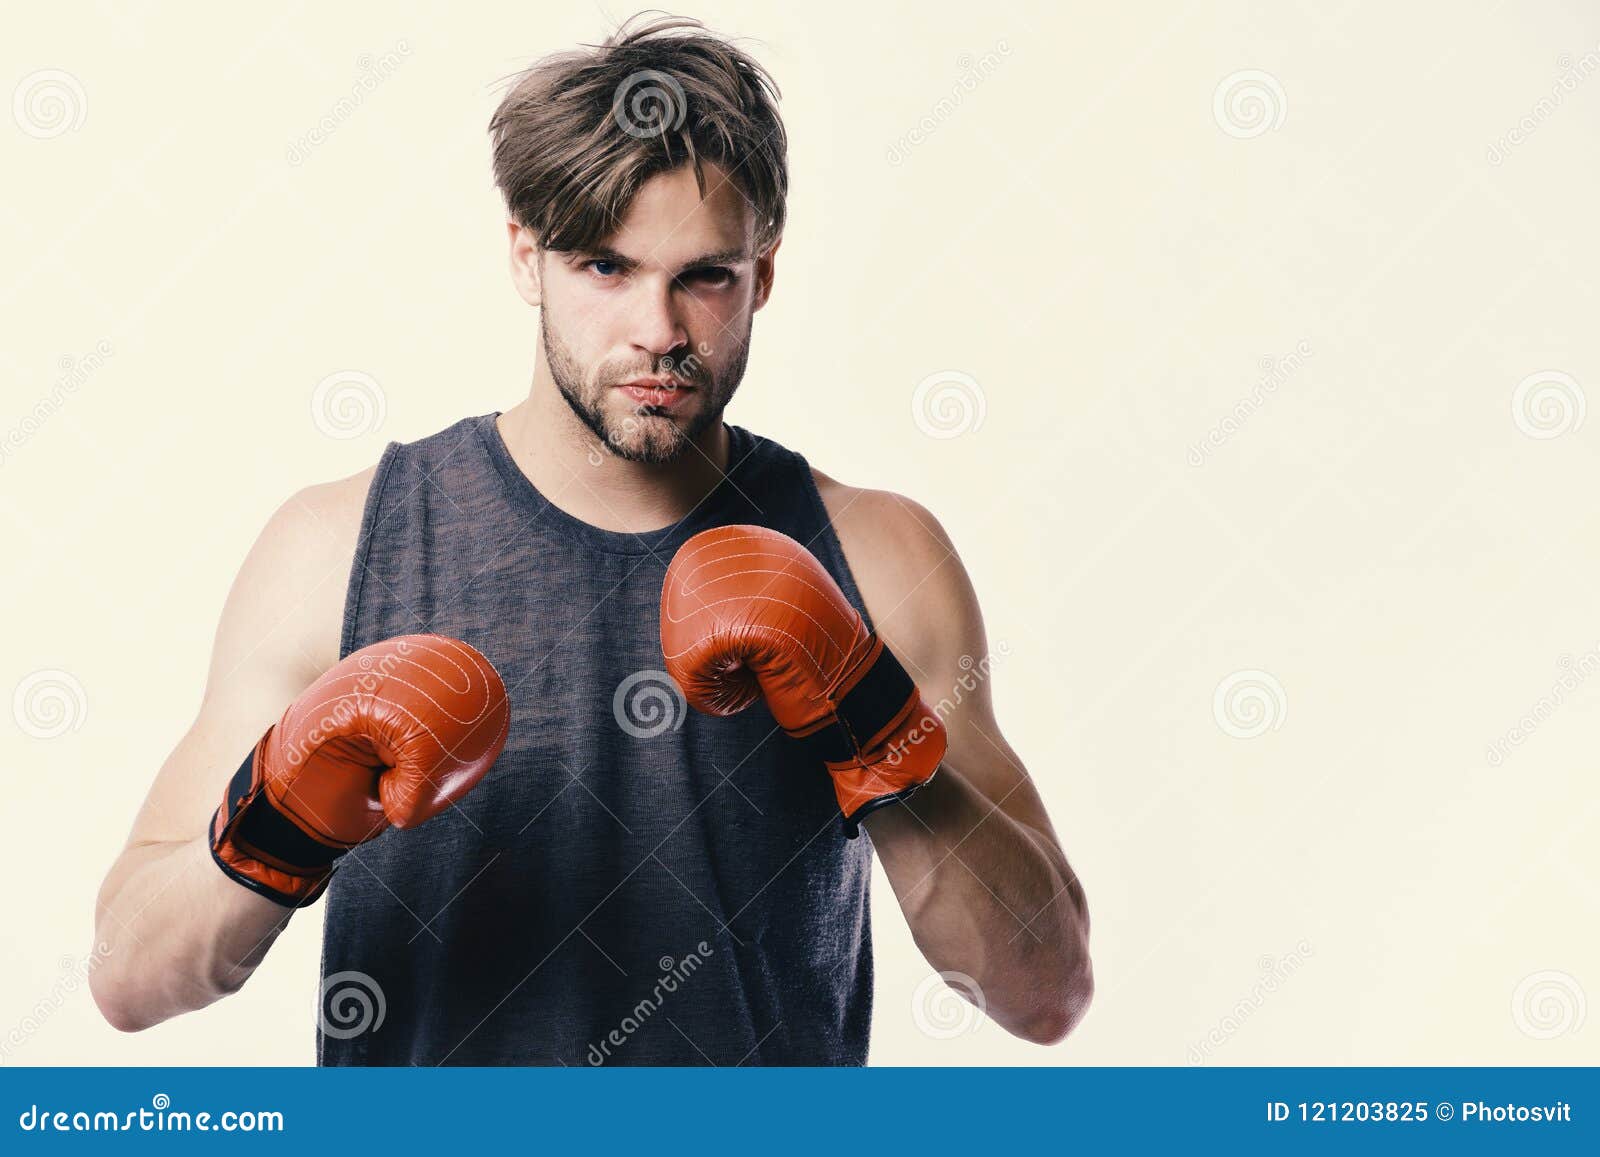 Man with Bristle and Confident Face Wears Boxing Gloves image